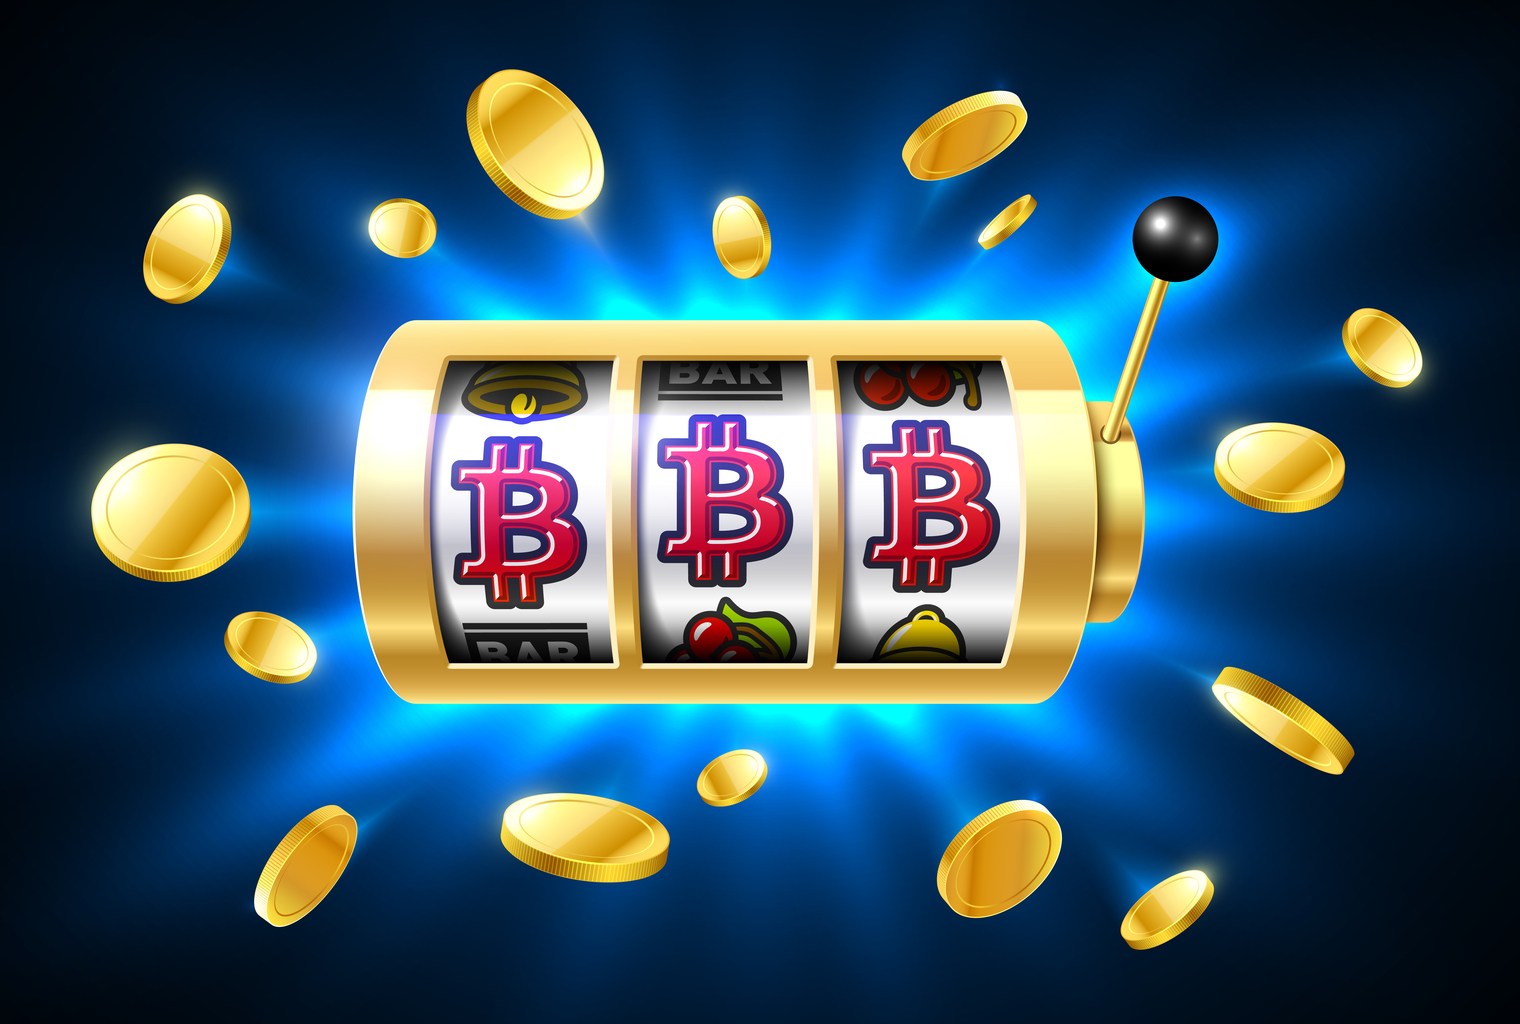 Machine bitcoin slot meaning